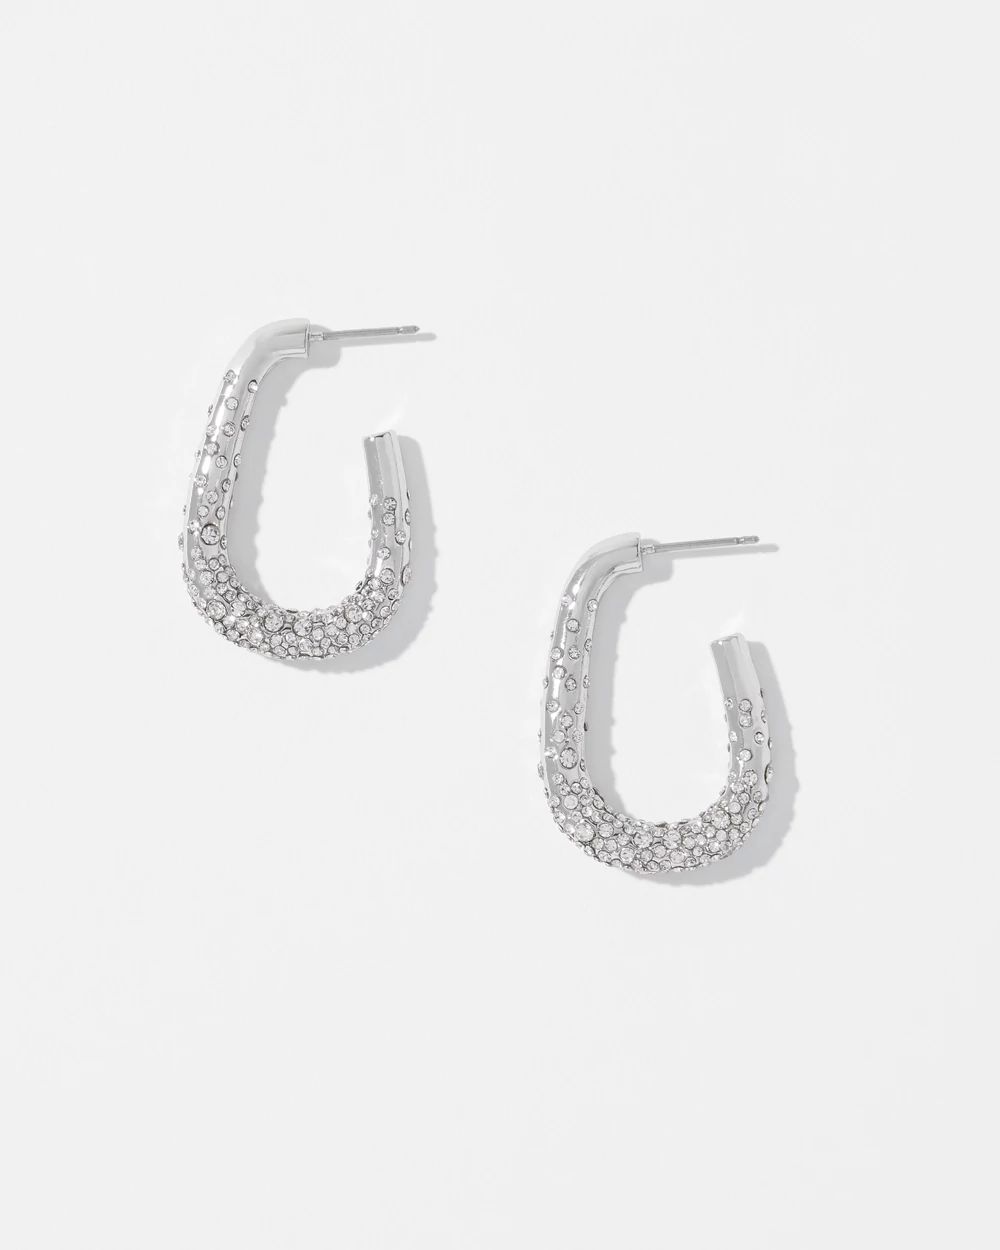 Silver Dusted Pave Hoop Earrings click to view larger image.